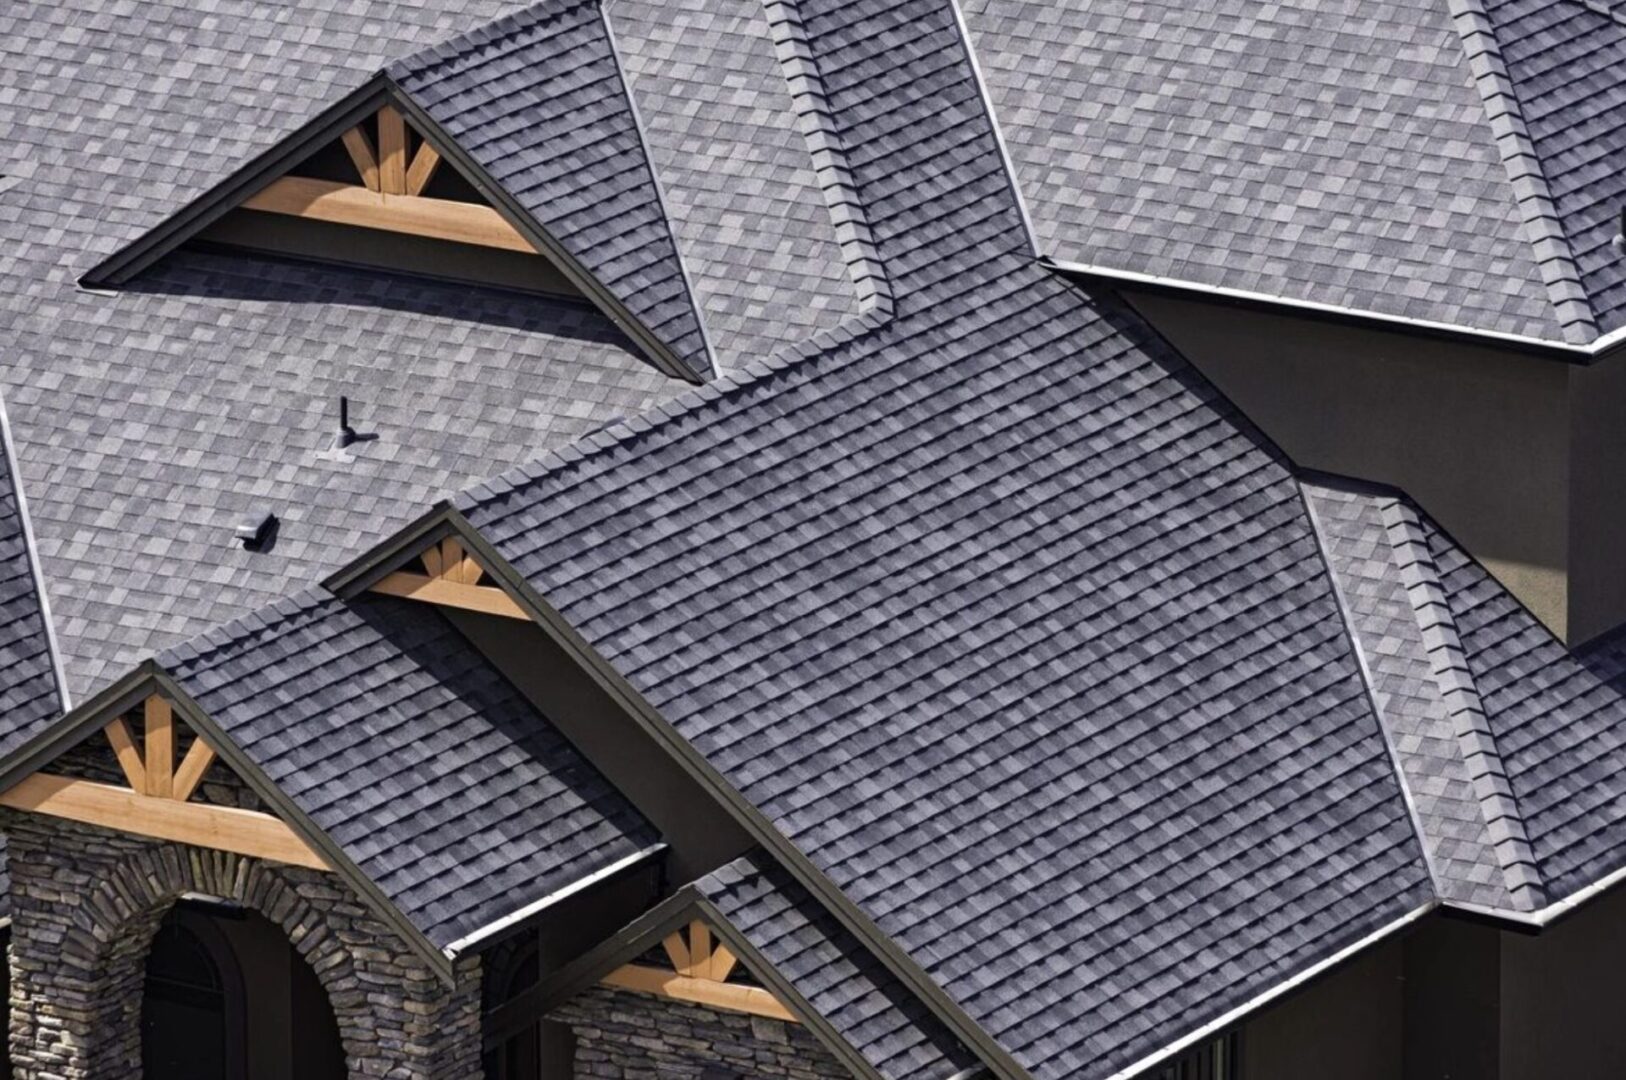 A close up of some roof shingles